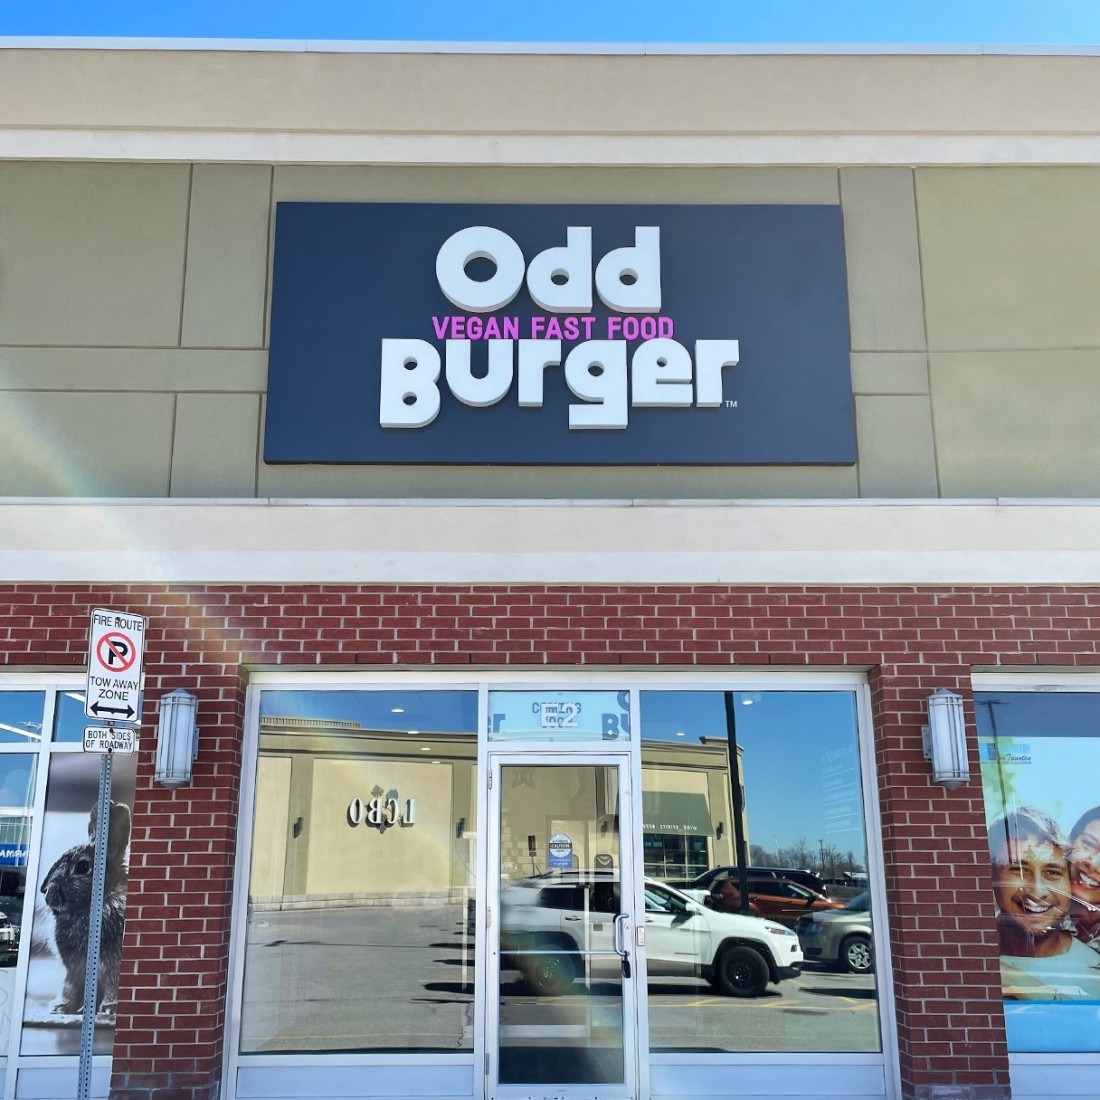 Odd Burger's new Whitby ON location for vegan fast food (CNW Group/Odd Burger Corporation)